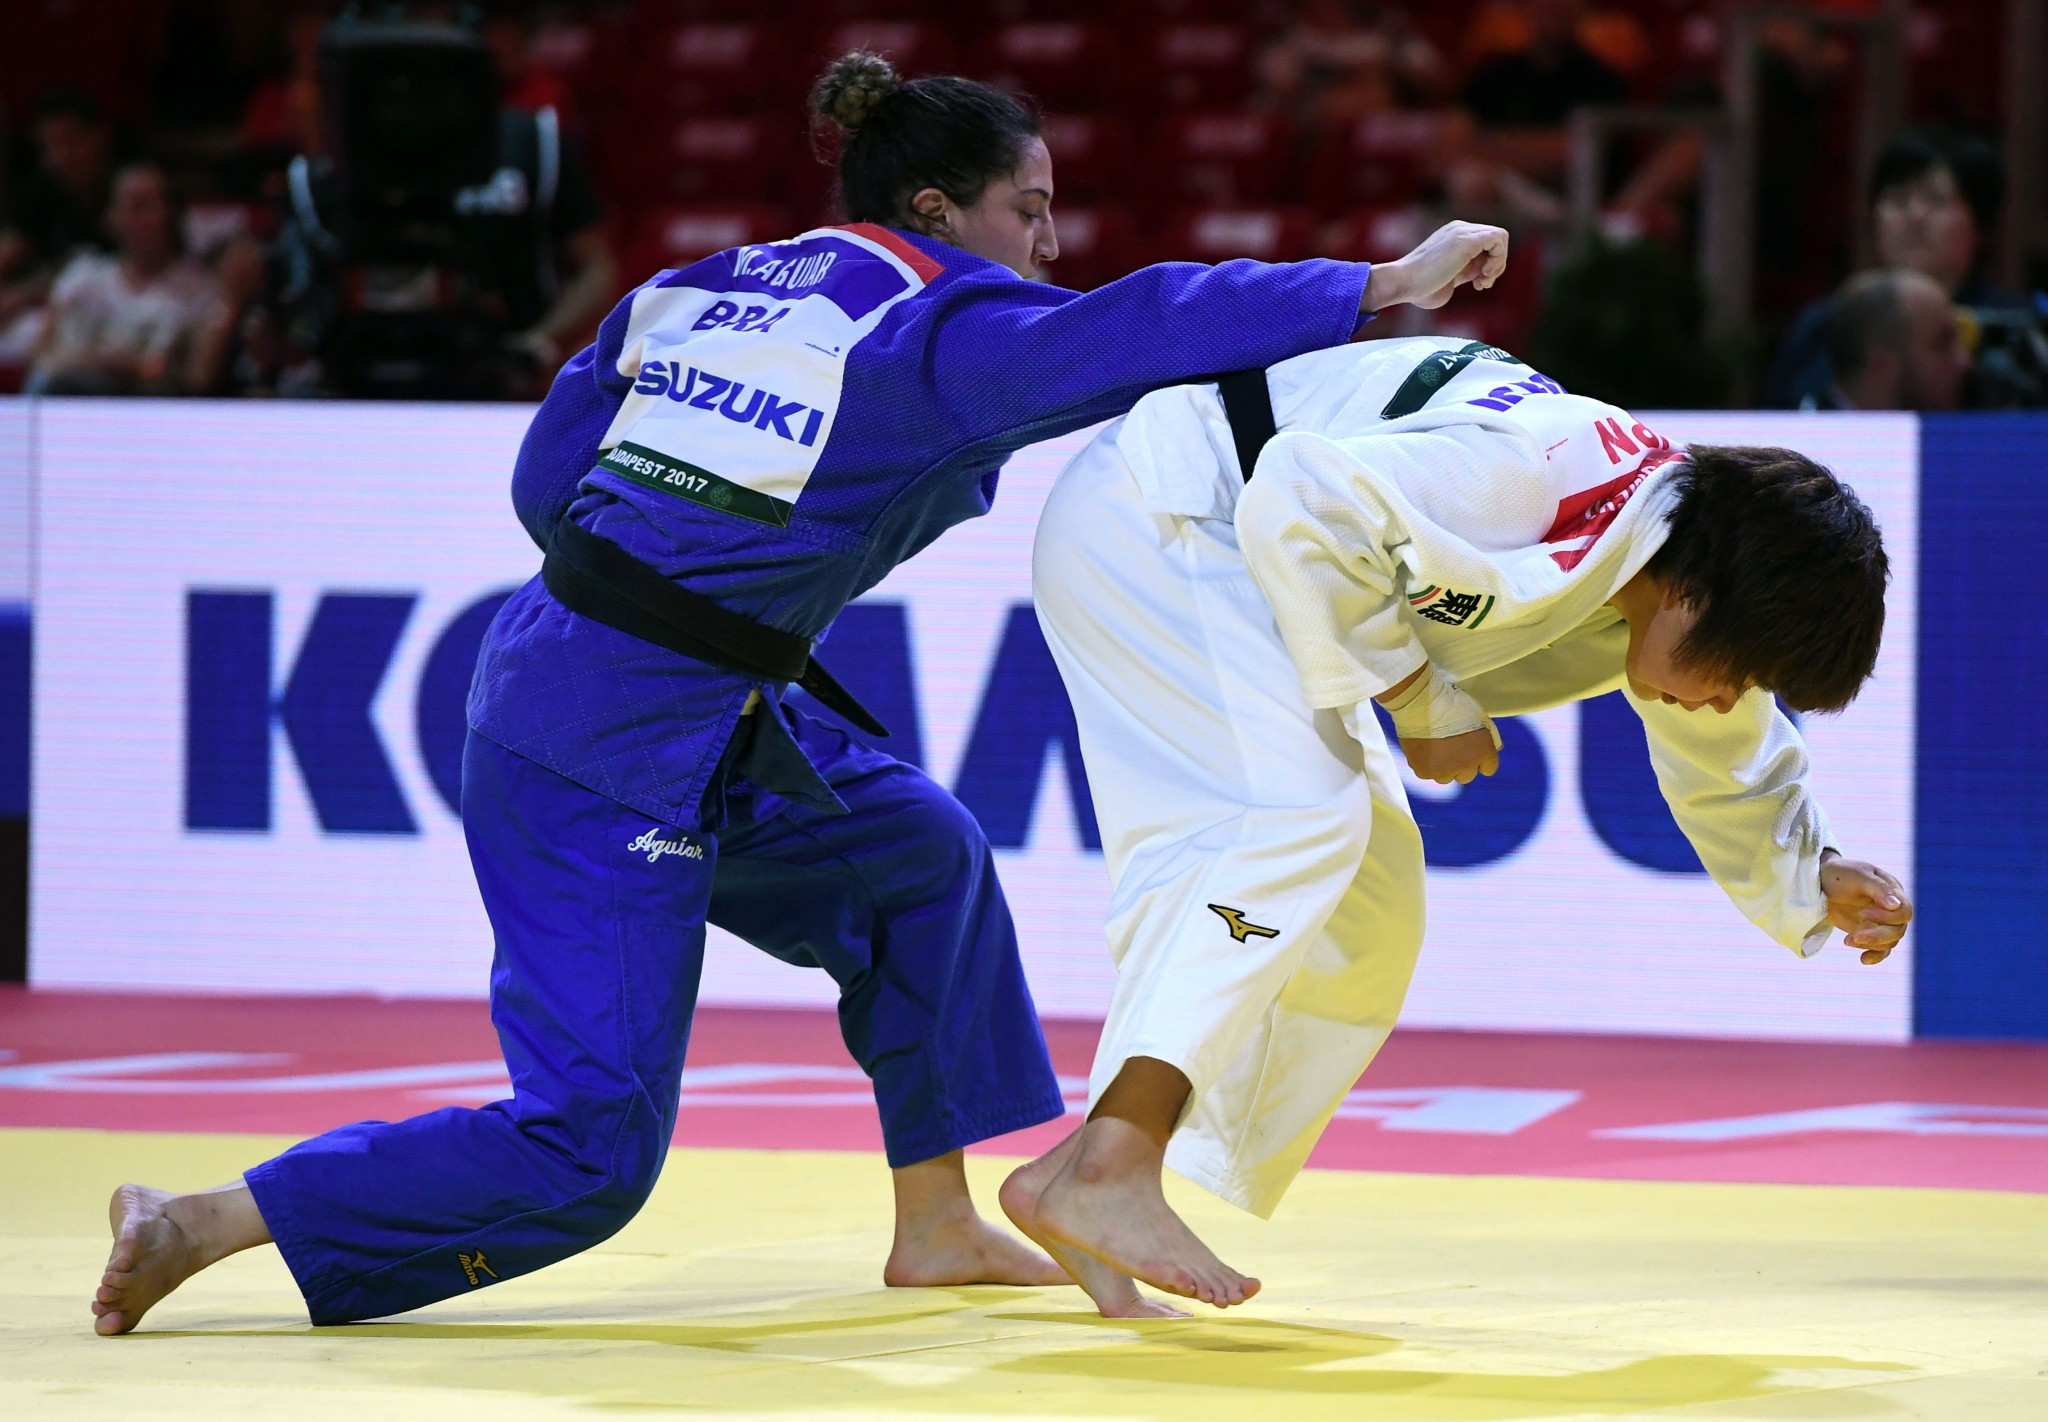 Mayra Aguiar of Brazil clinched her second world title with victory over Mami Useki of Japan in the under 78kg final ©Getty Images